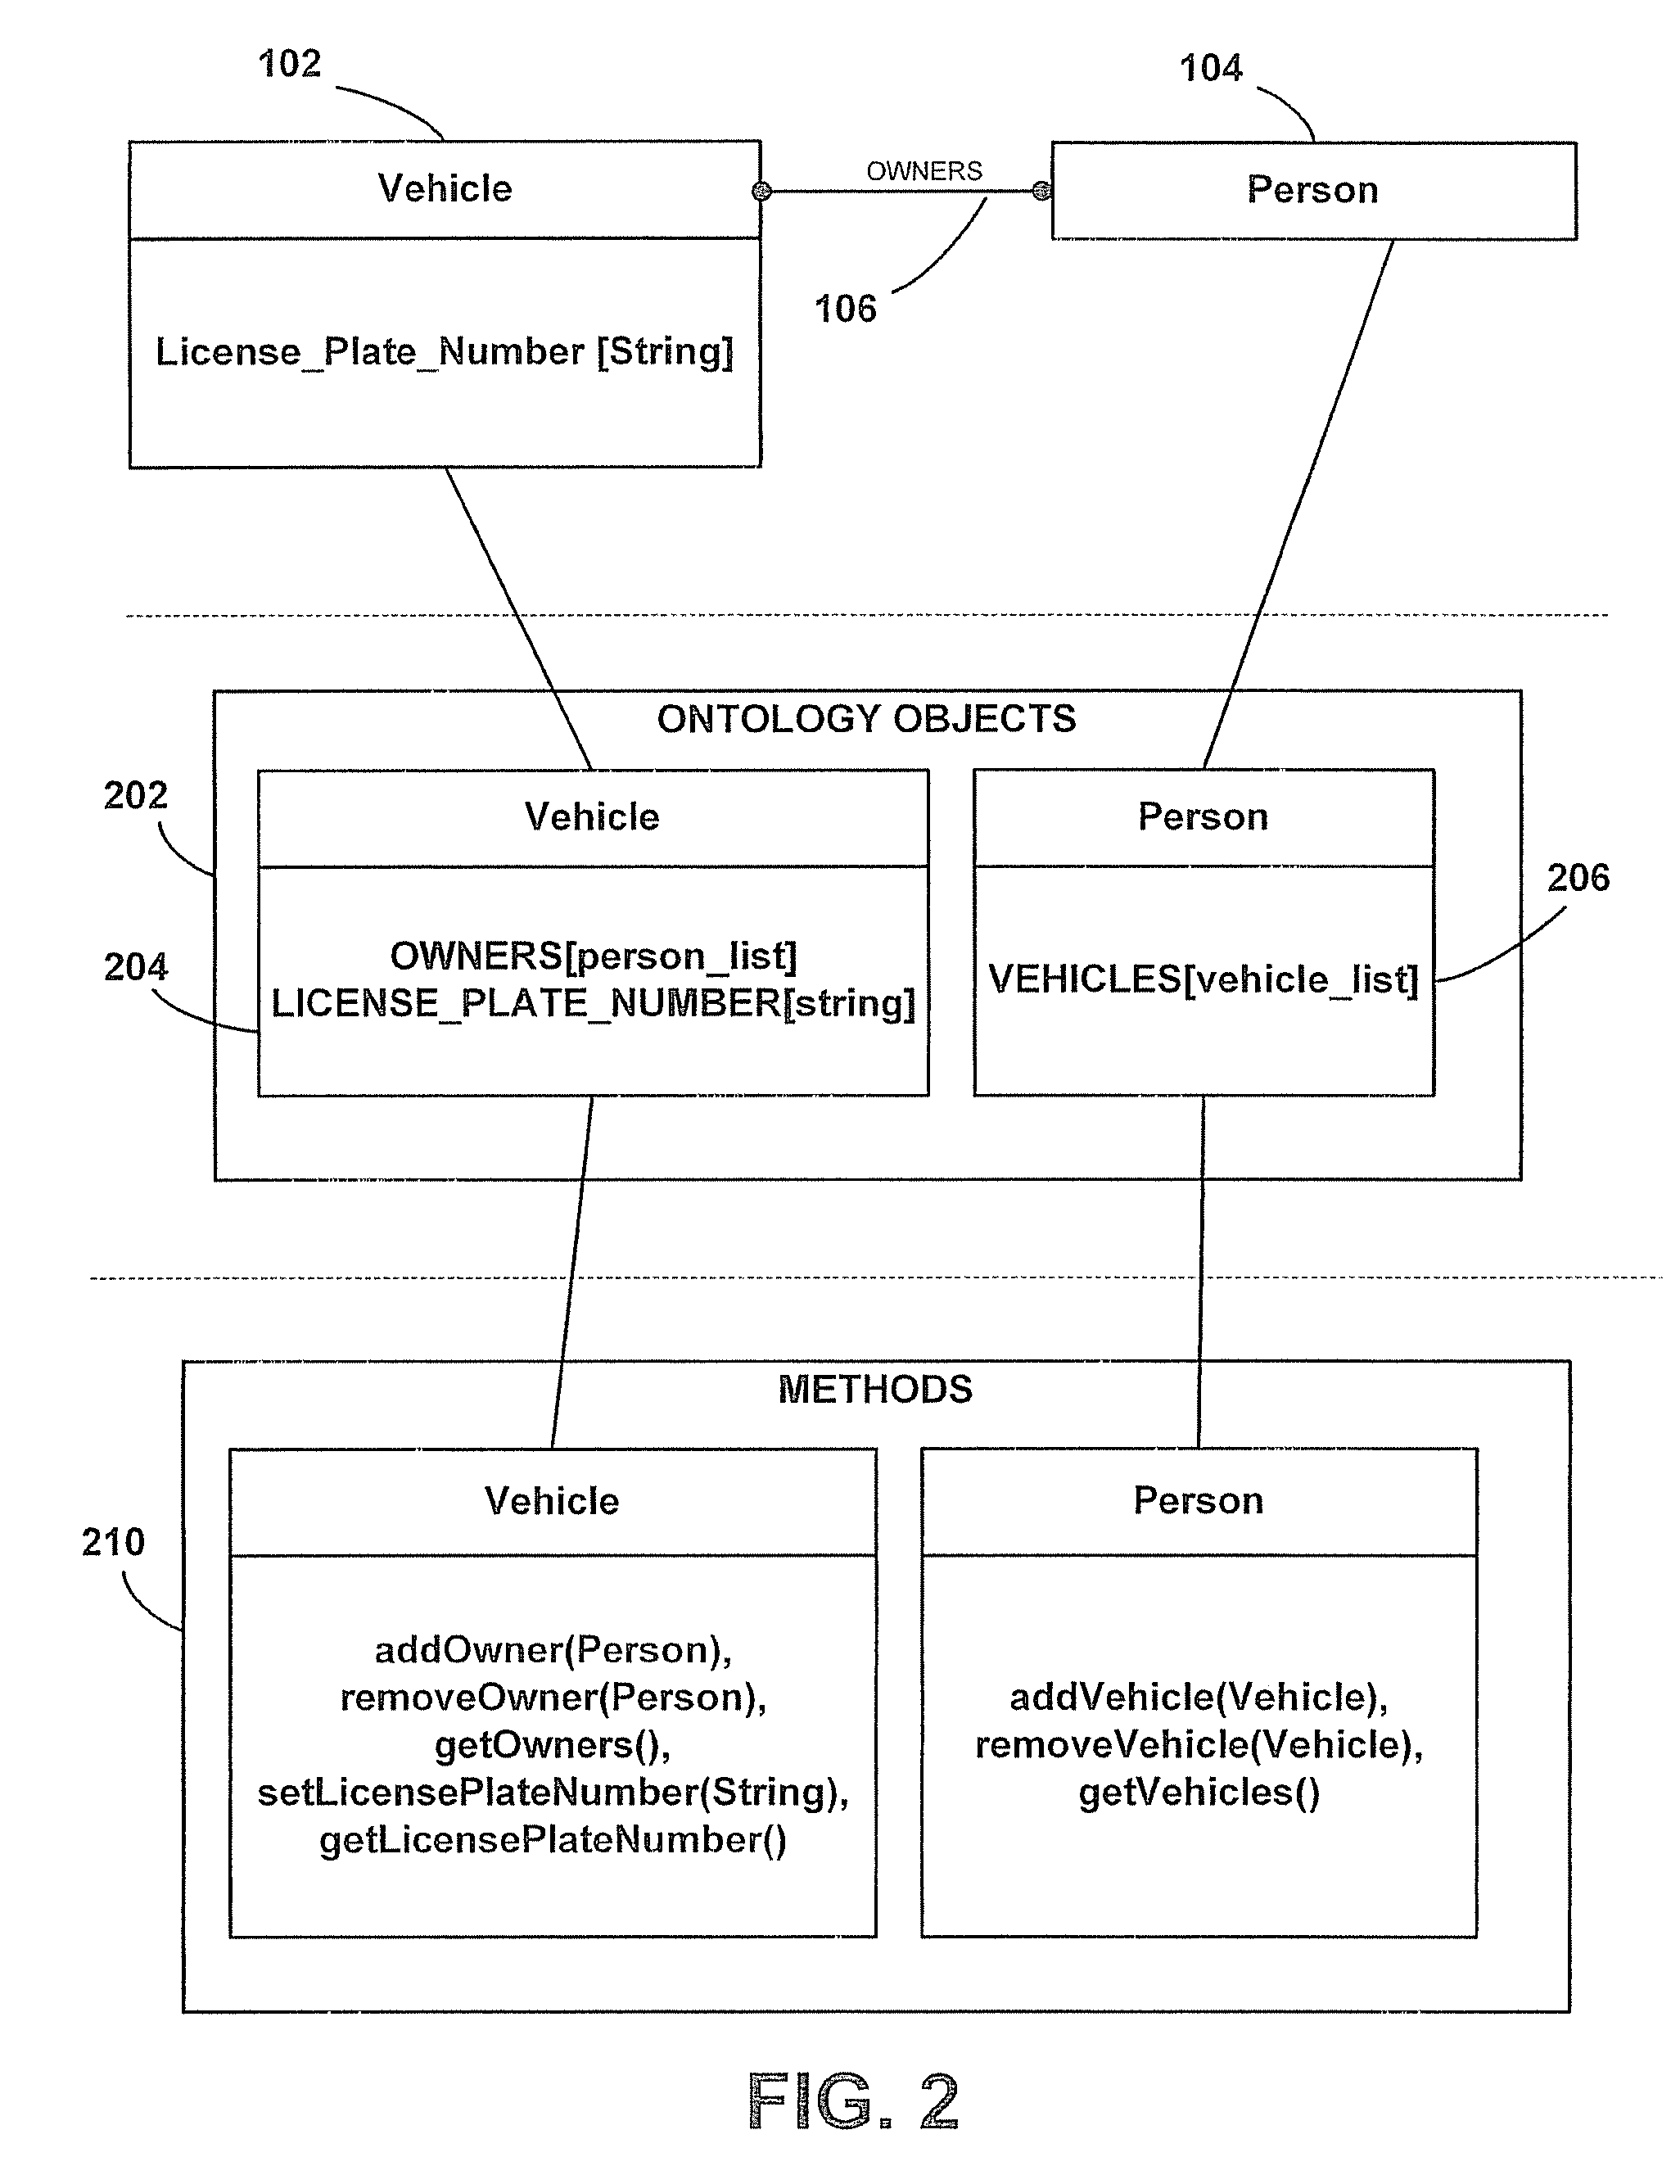 Method and System for Metamodeling Using Dynamic Ontology Objects